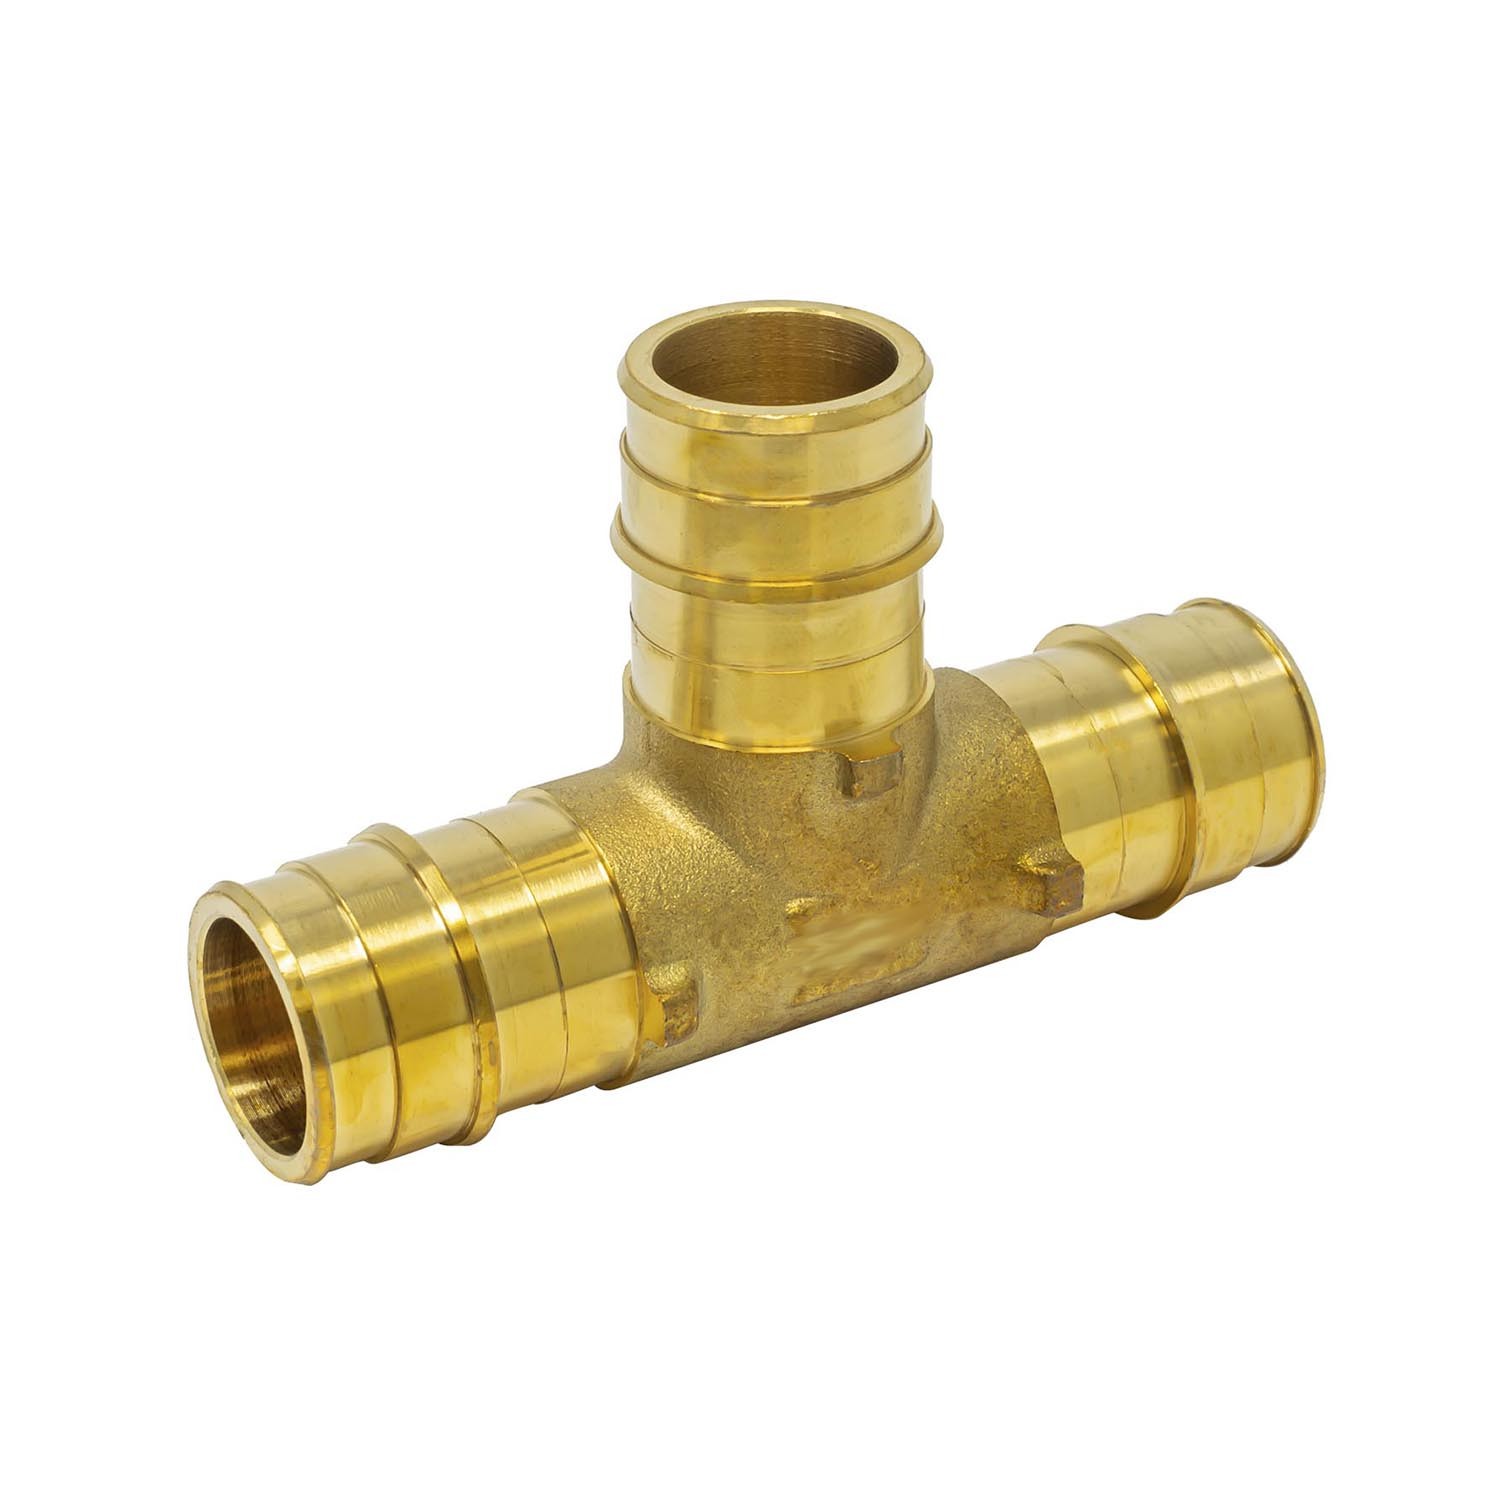 ASTM F1960 Free Lead Brass Expansion PEX Tee